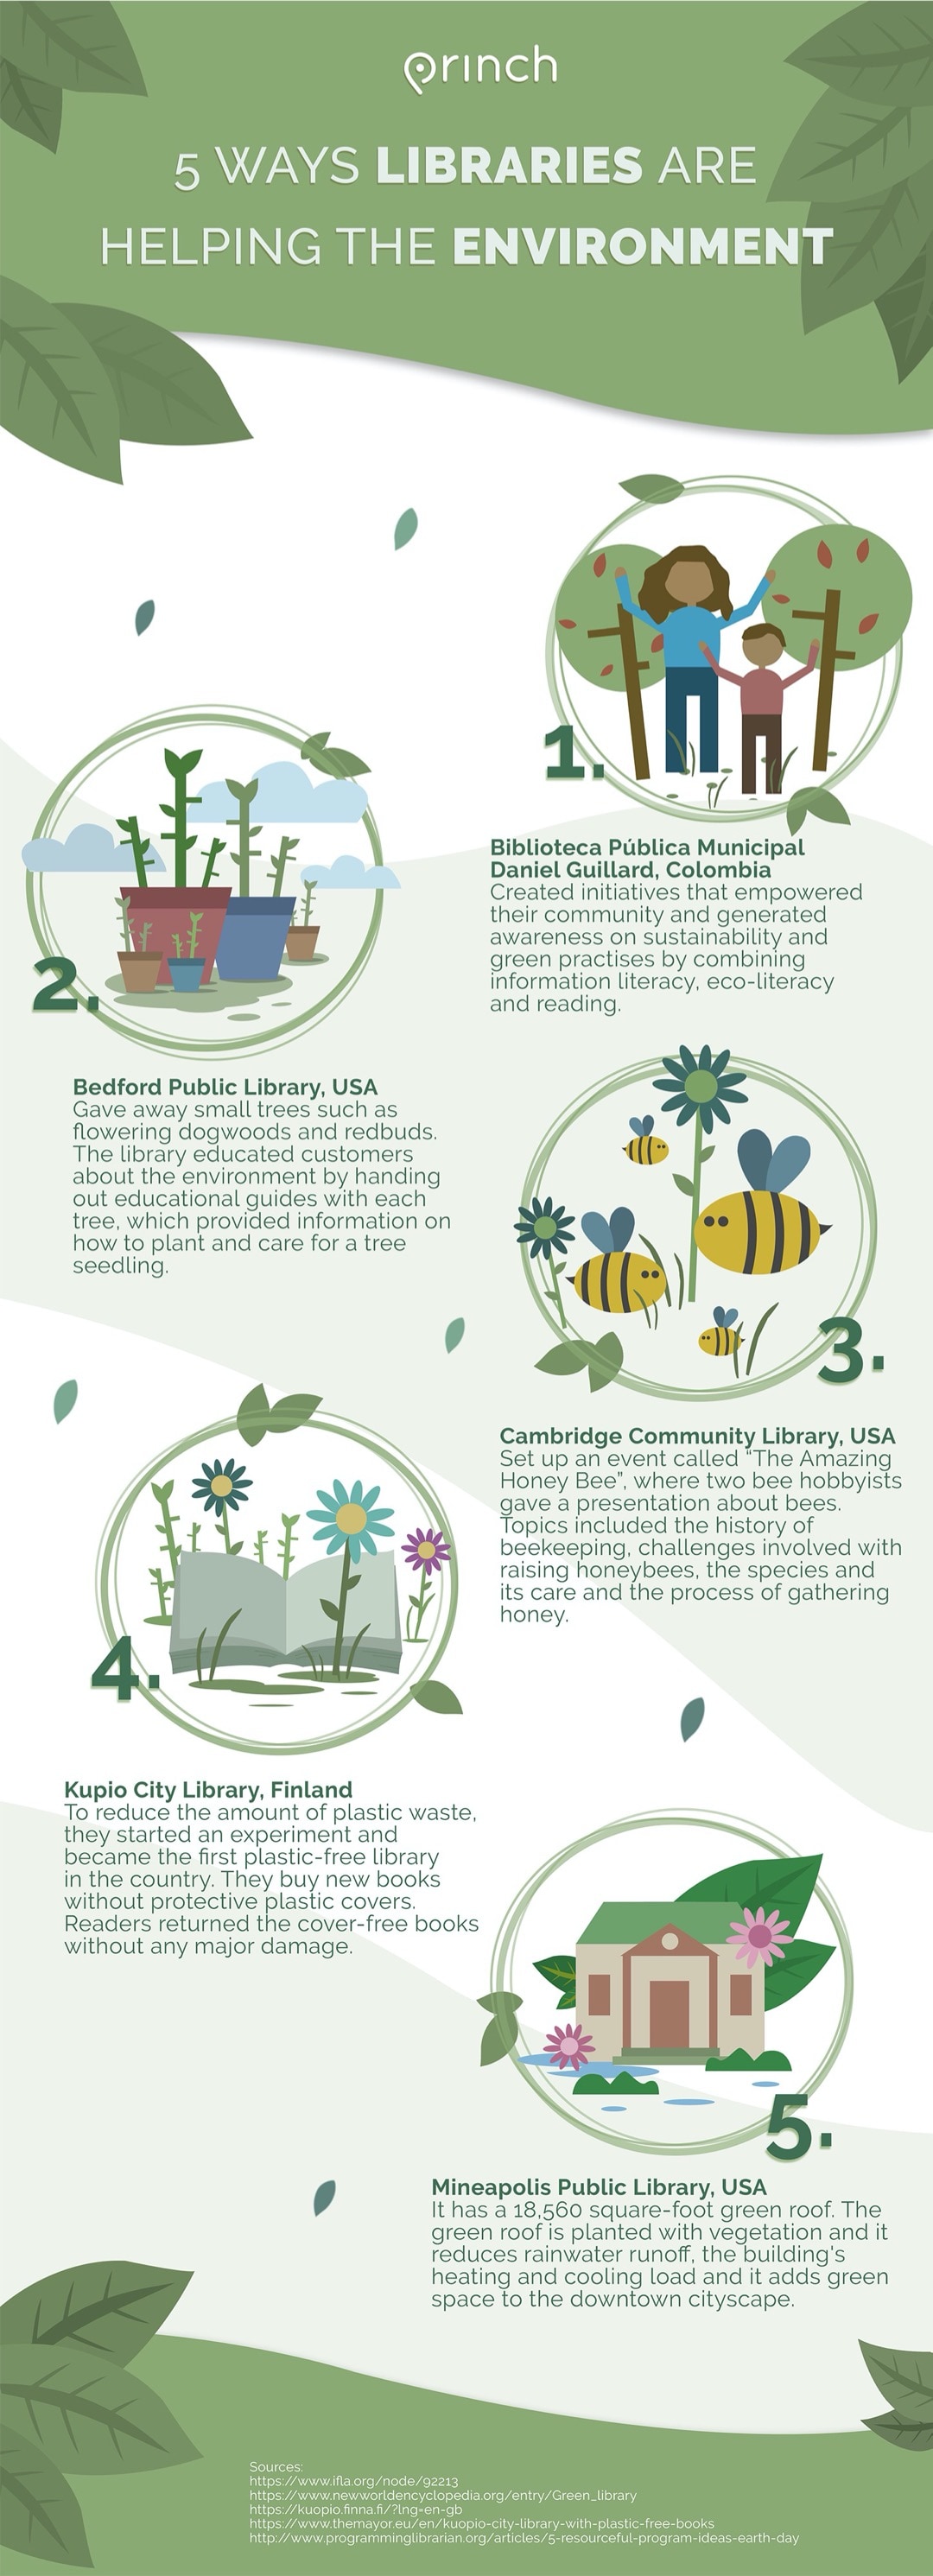 5 examples how libraries are helping the environment (infographic)